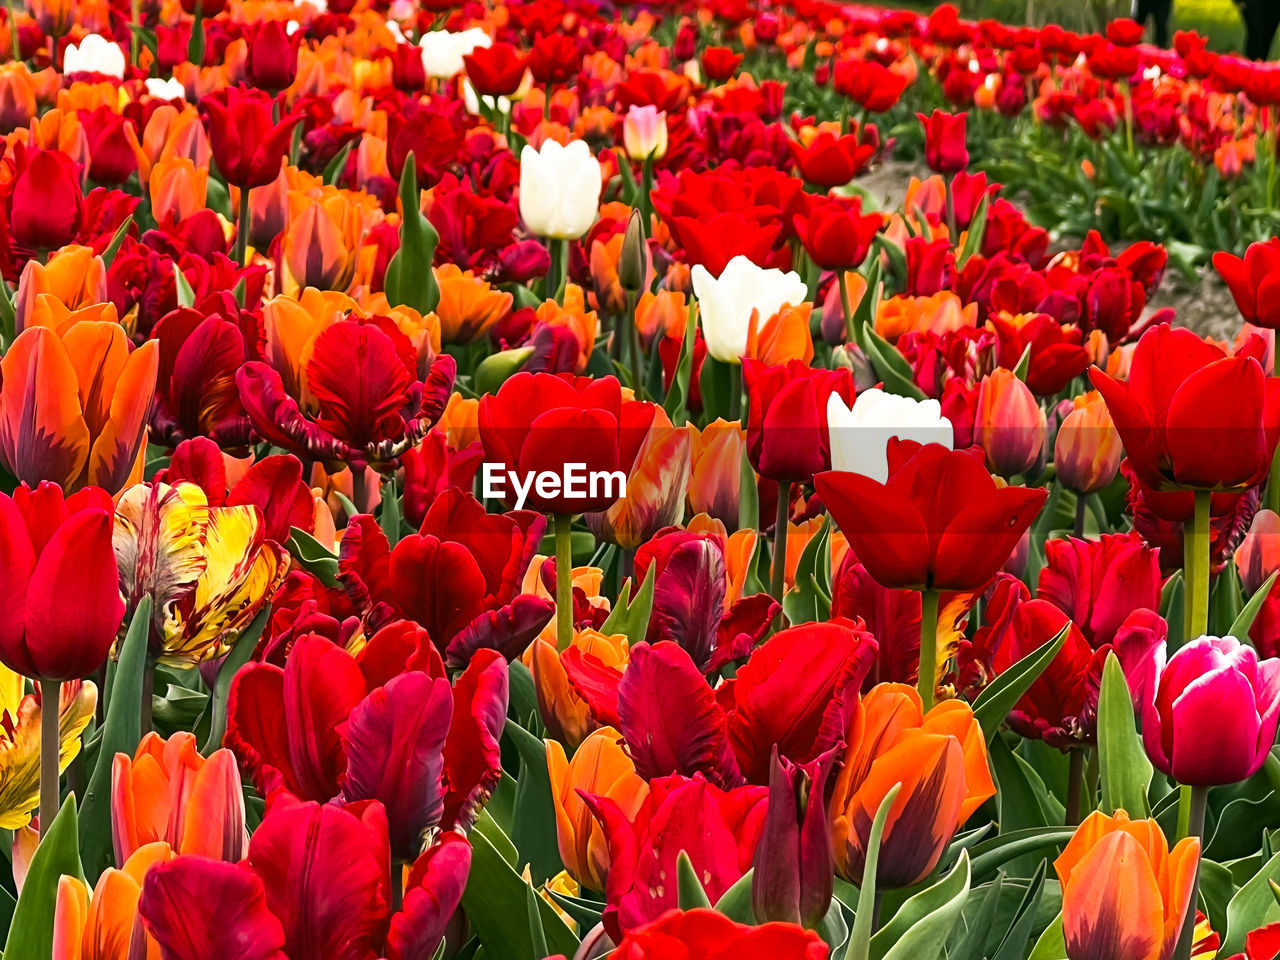 flower, flowering plant, plant, tulip, beauty in nature, freshness, red, fragility, petal, nature, flower head, inflorescence, growth, abundance, field, flowerbed, close-up, multi colored, backgrounds, land, no people, full frame, day, springtime, sunlight, botany, outdoors, vibrant color, yellow